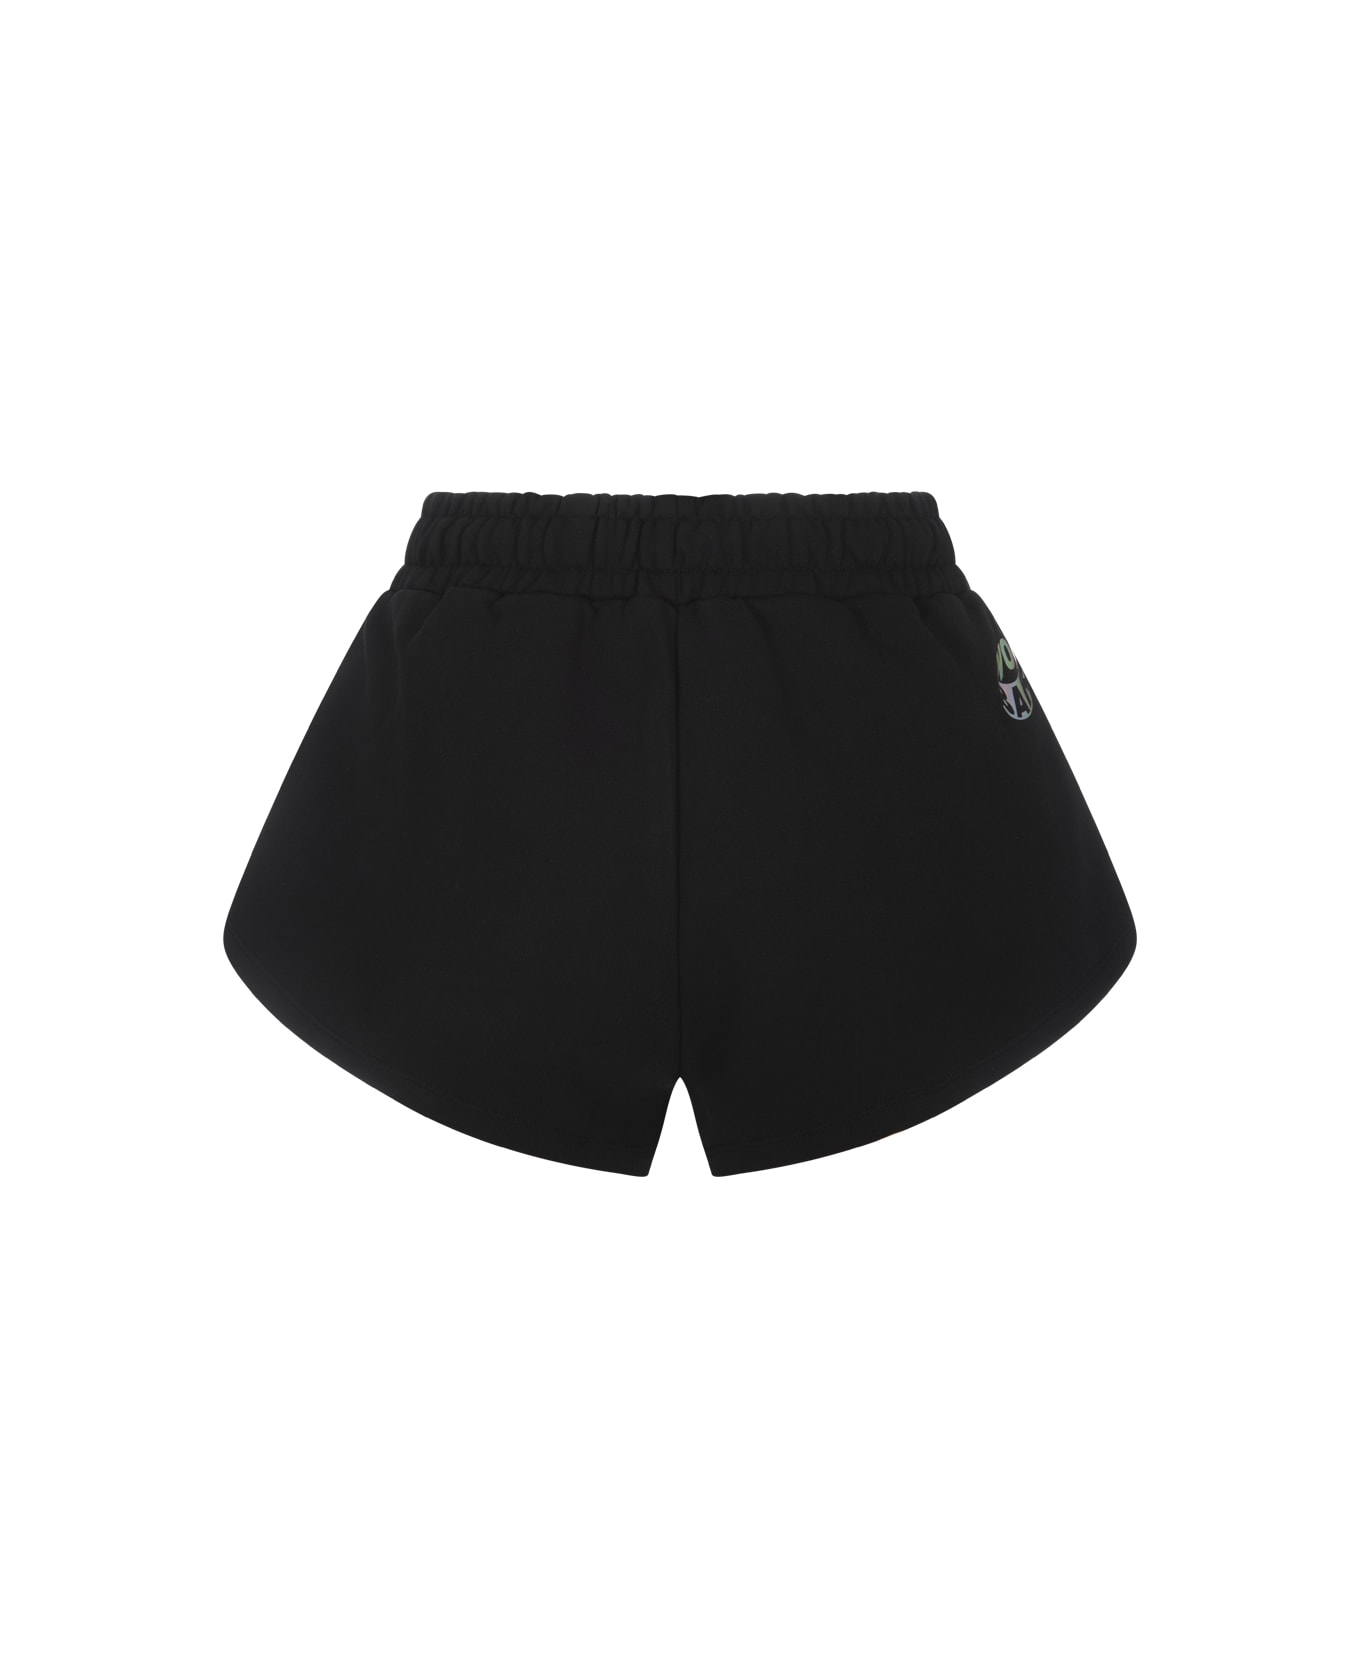 Barrow Black Crop Shorts With Smile Patch - Black